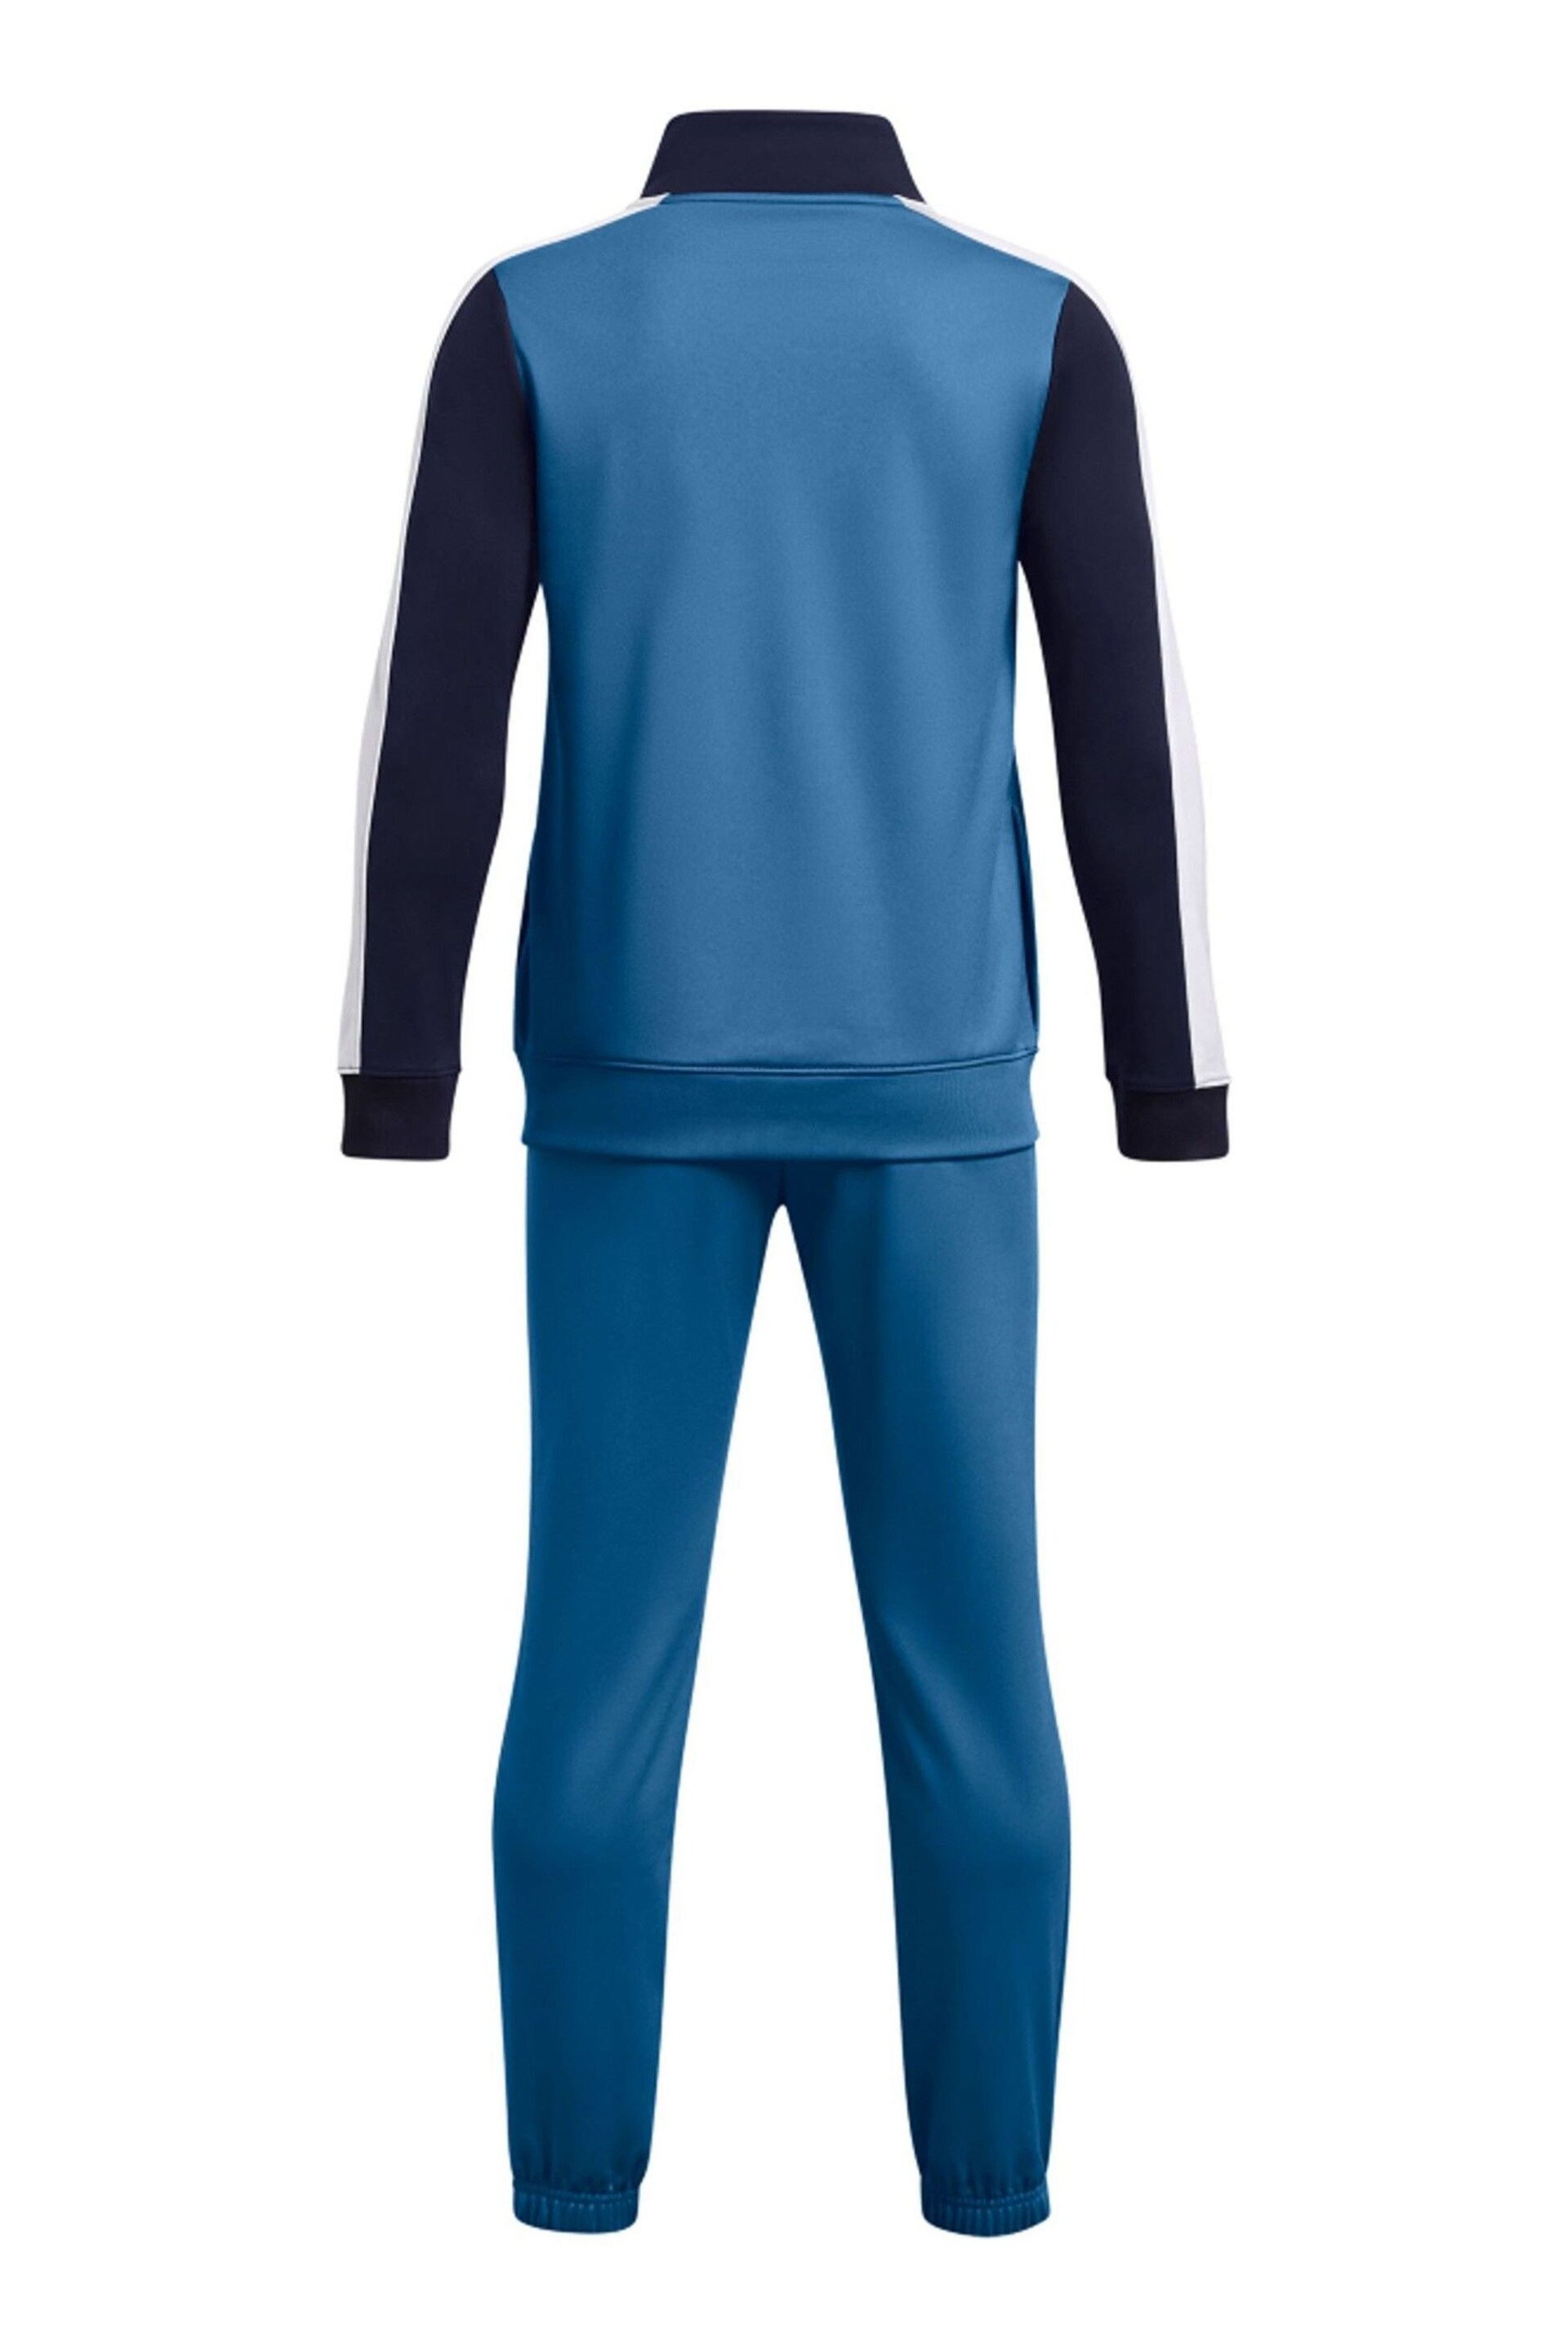 Under Armour Blue/Black Knit Tracksuit - Image 2 of 2